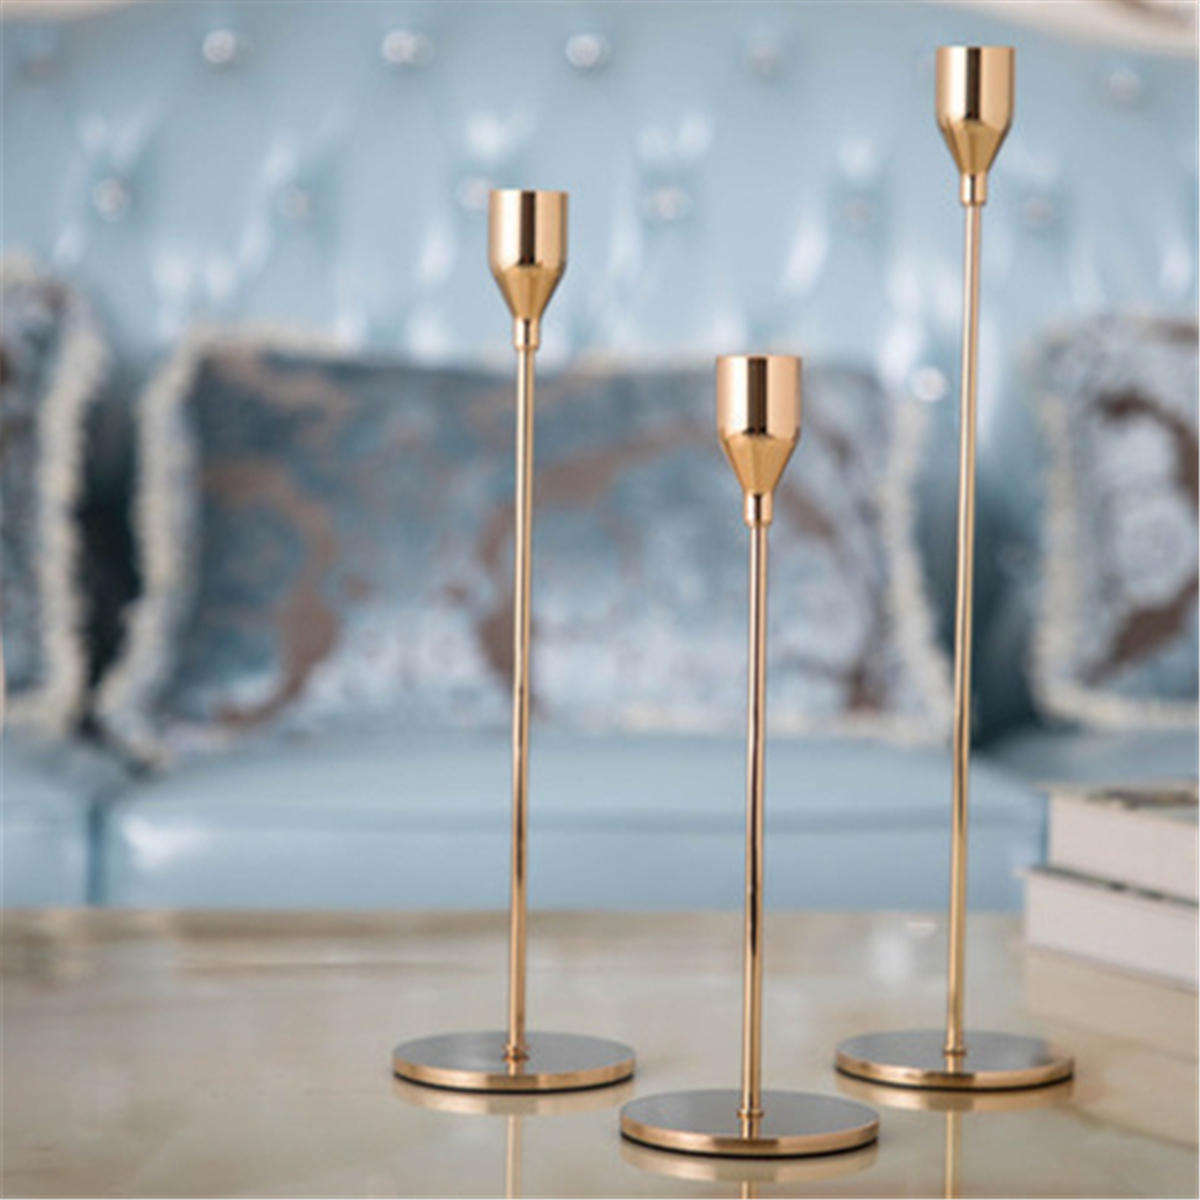 Modern Gold Candlestick Candle Holder Table Dinner Tealight Party Wedding Decorations